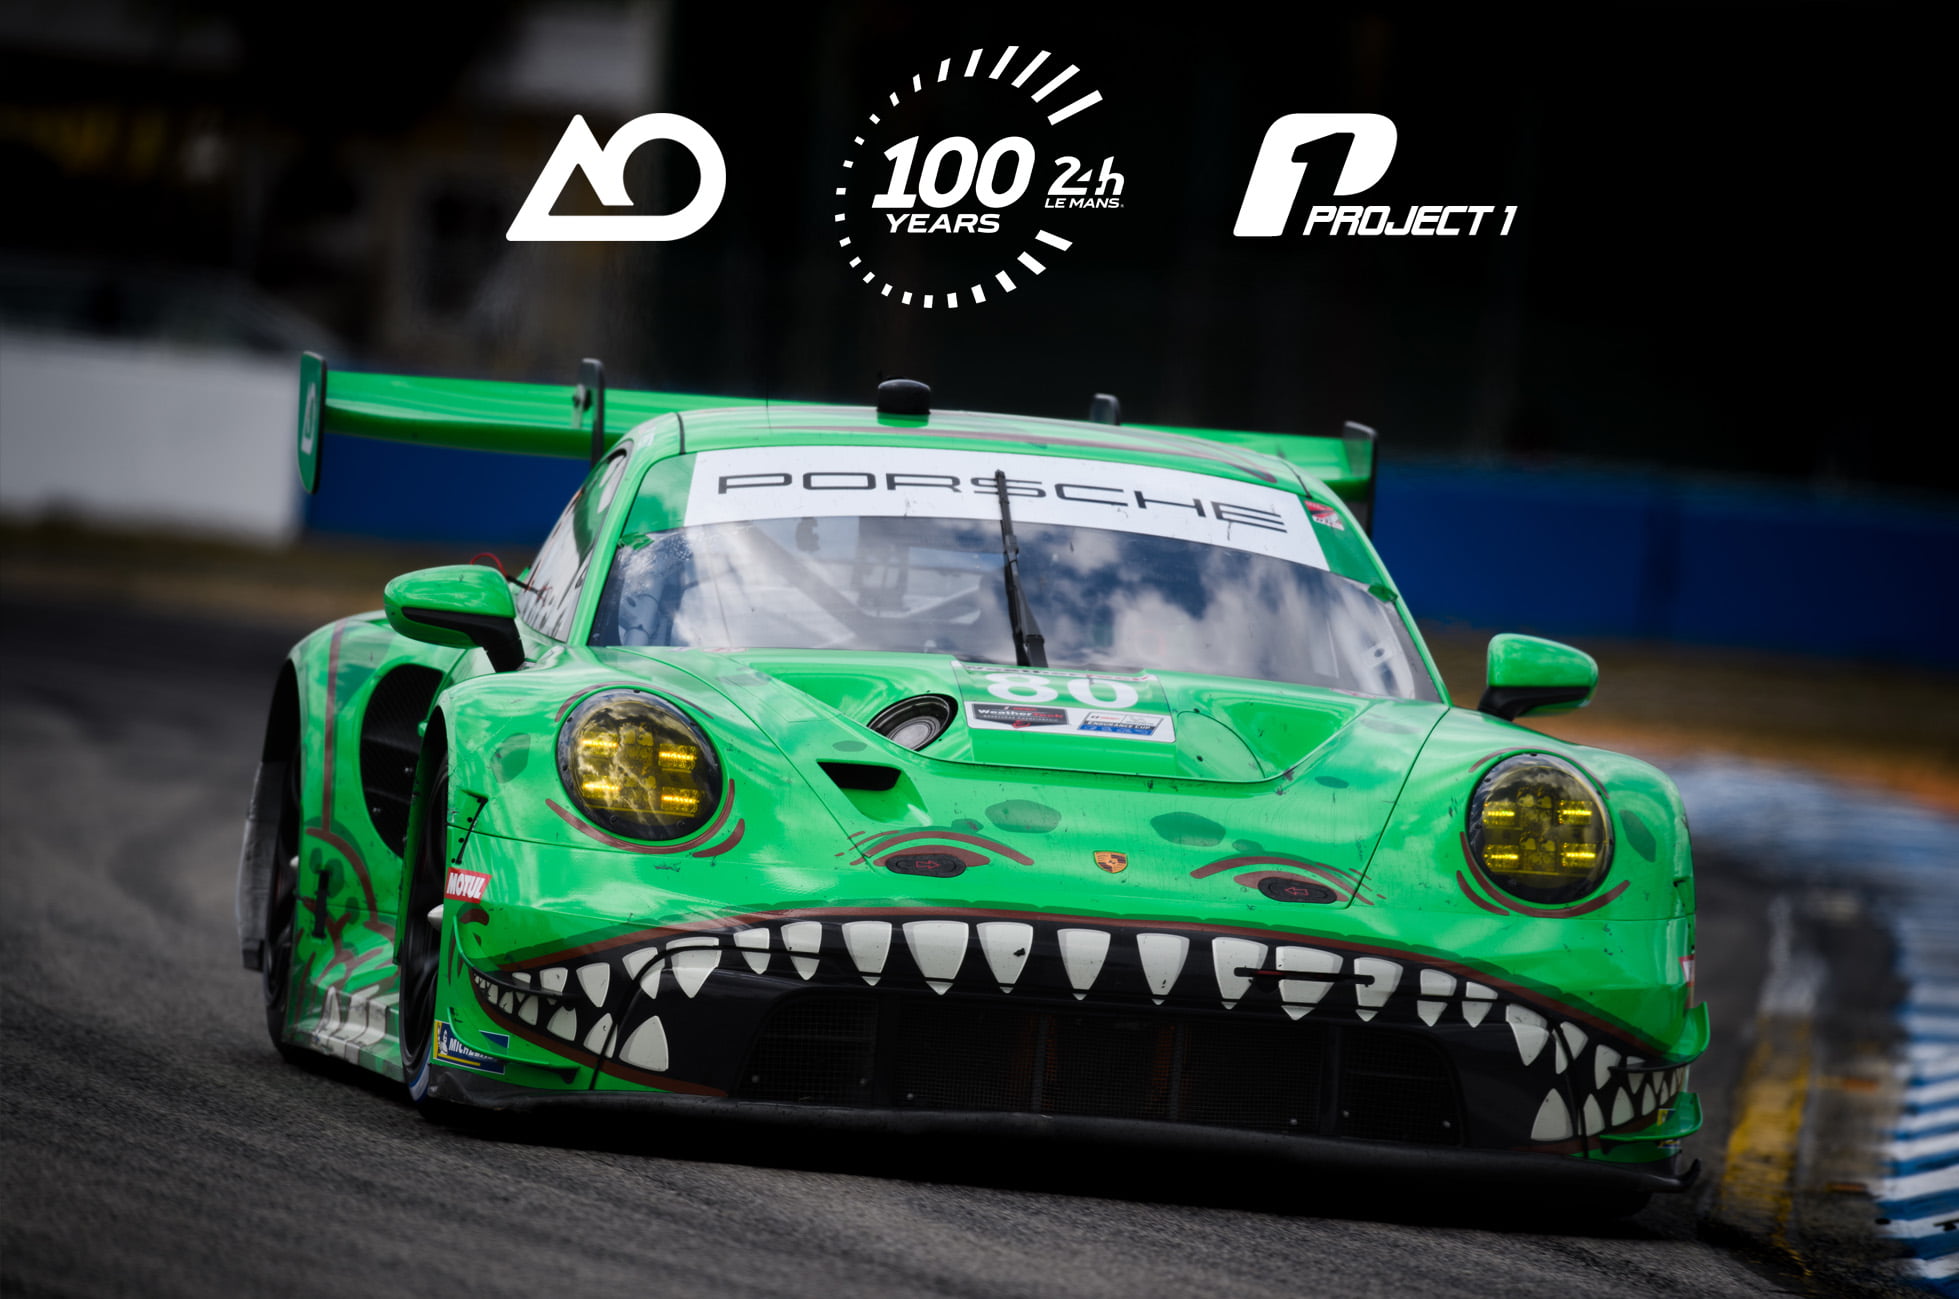 AO Racing’s Rexy Livery to Make International Debut at 24 Hours of Le Mans